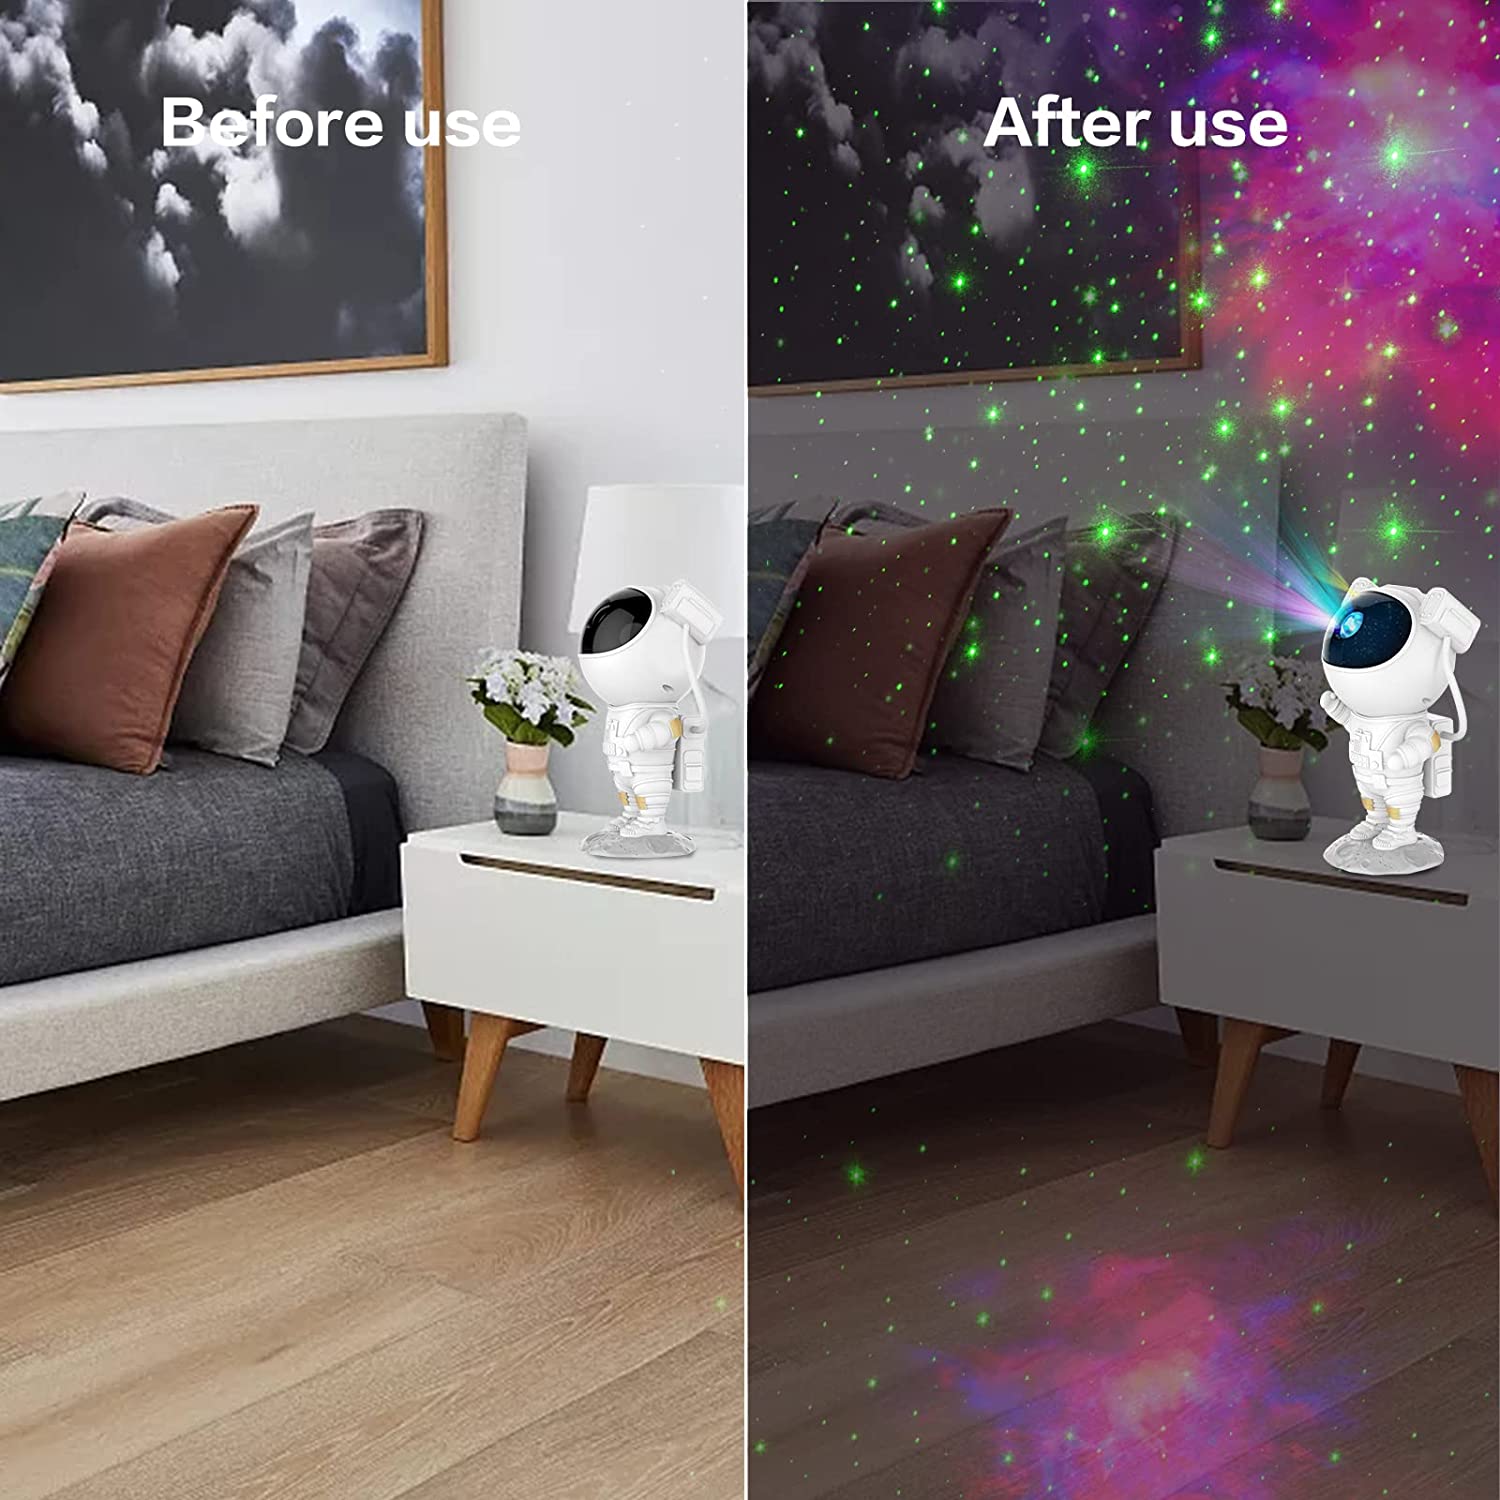 SZPACMATE Astronaut Galaxy Star Projector with Nebula, Timer & Remote Control - Bedroom & Ceiling Light Show, Perfect Gift for Kids & Adults 7